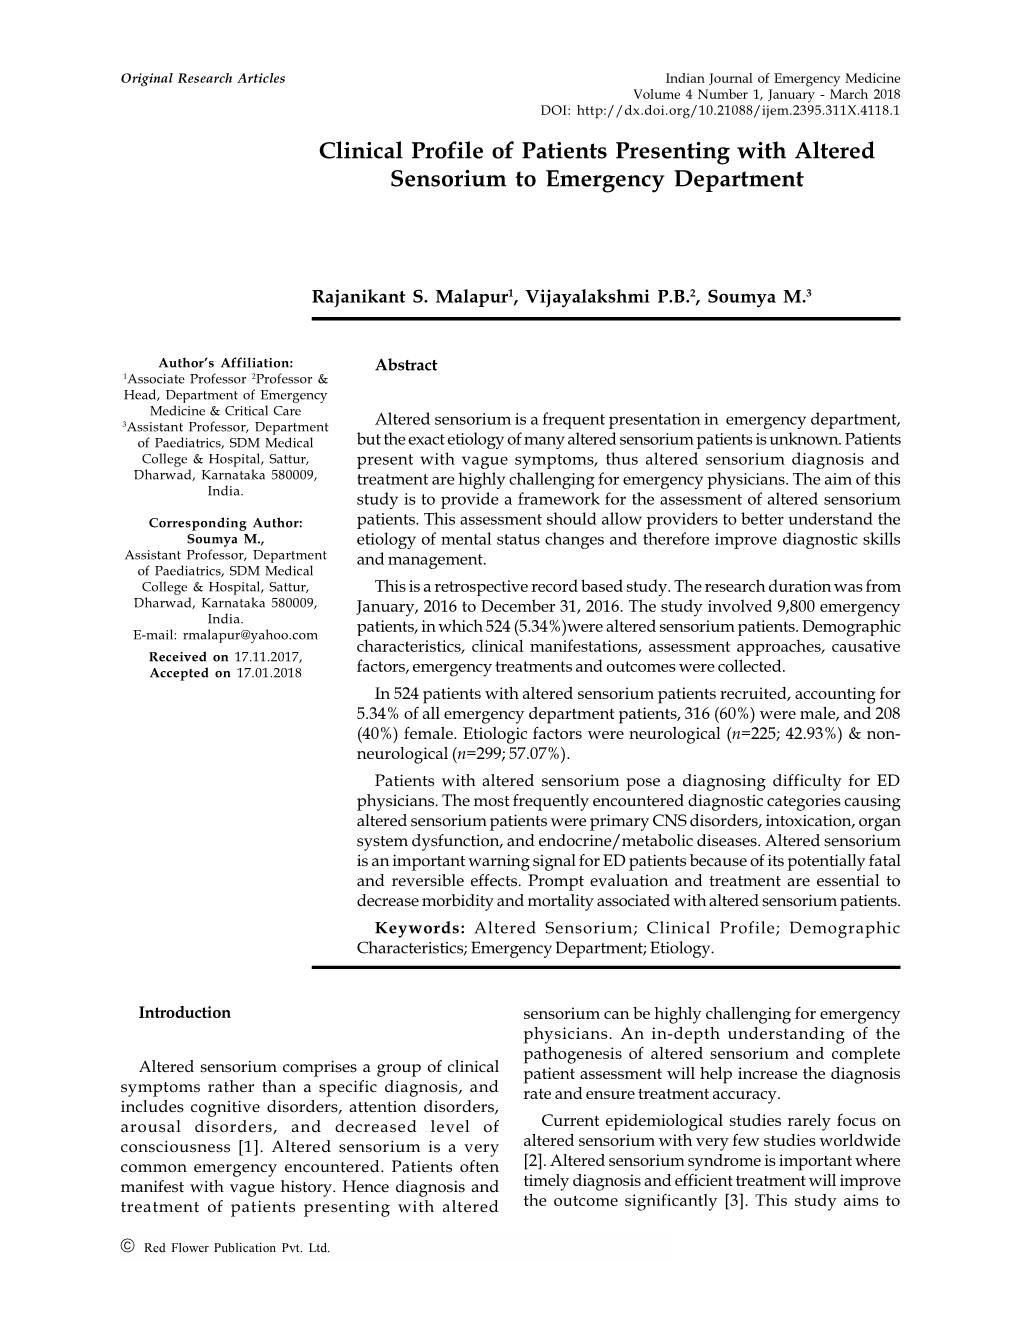 Clinical Profile of Patients Presenting with Altered Sensorium to Emergency Department